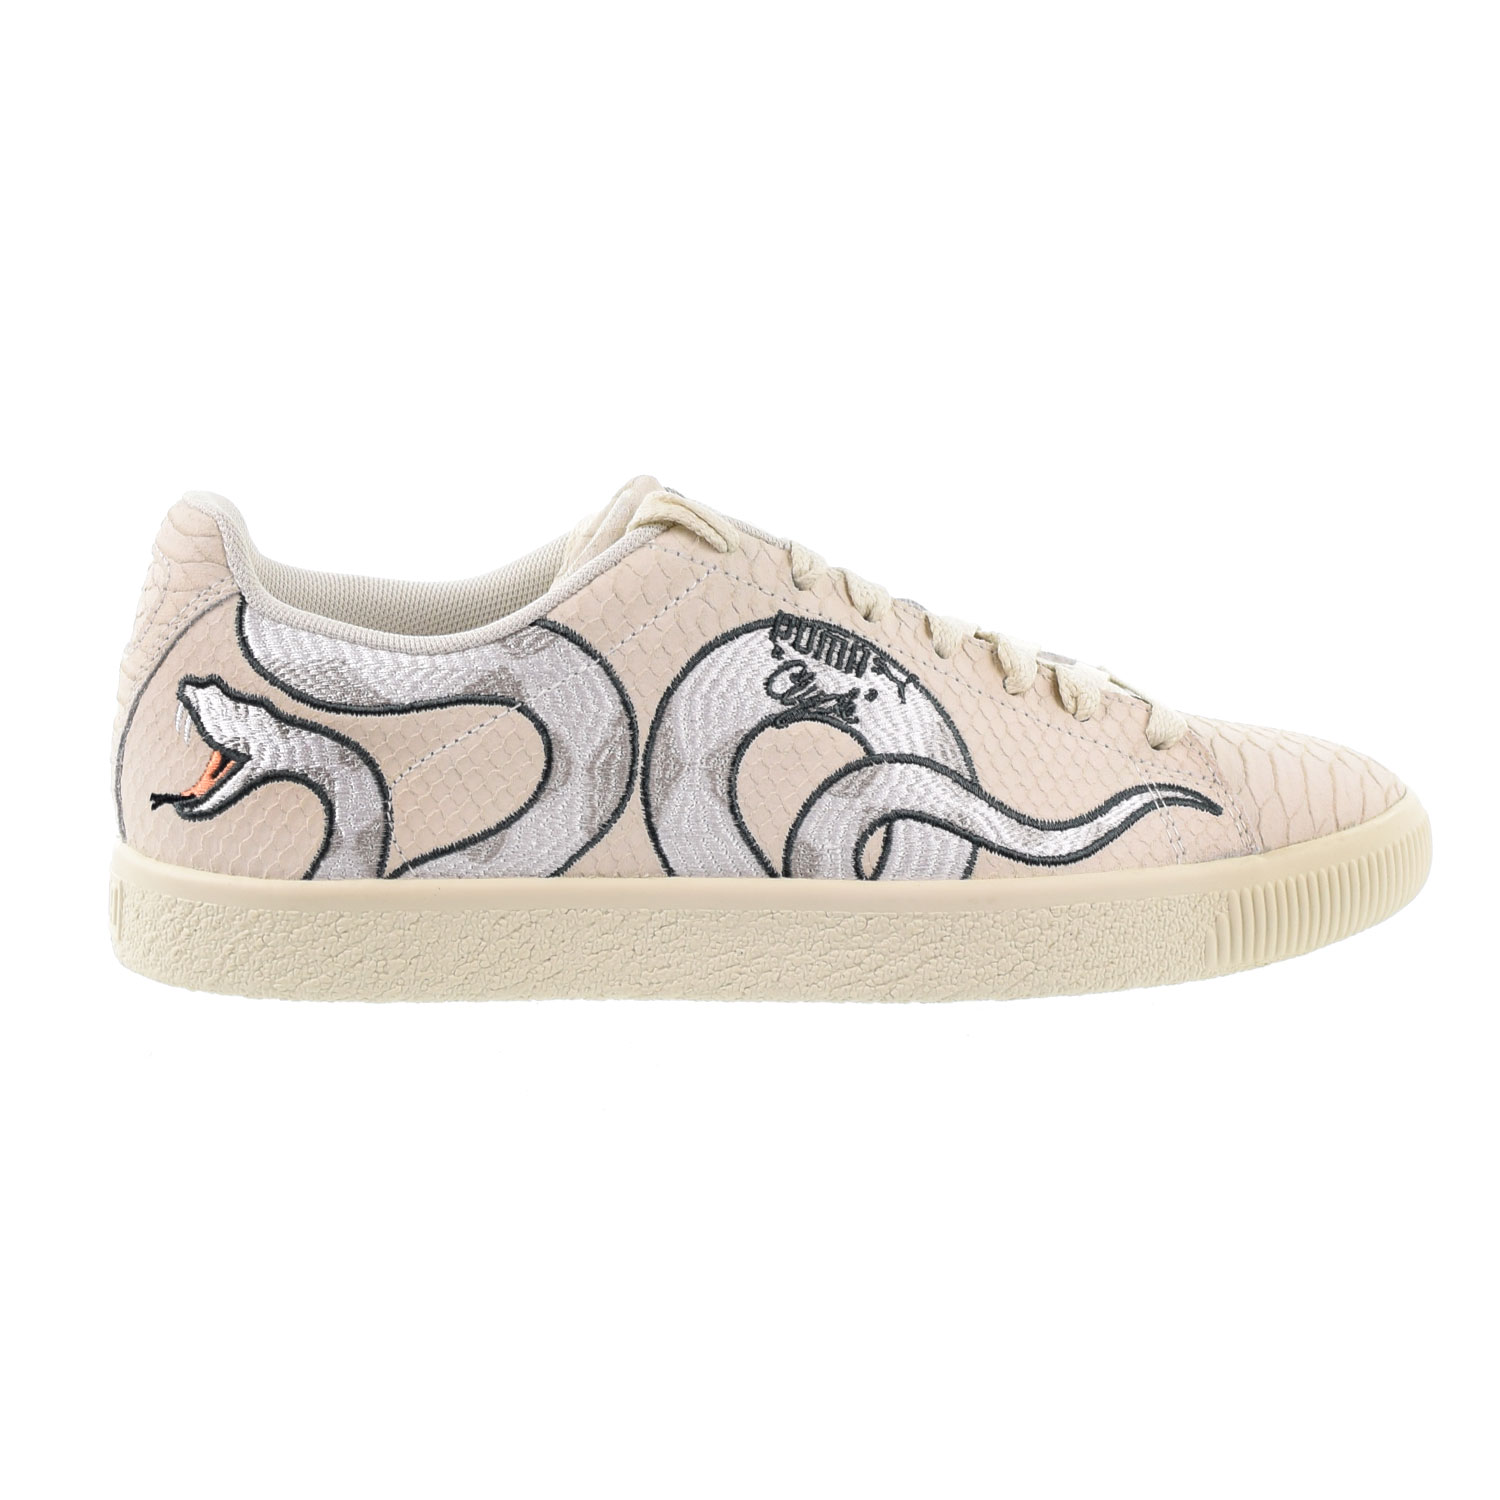 Puma Clyde Snake Embroidery Men's Shoes 